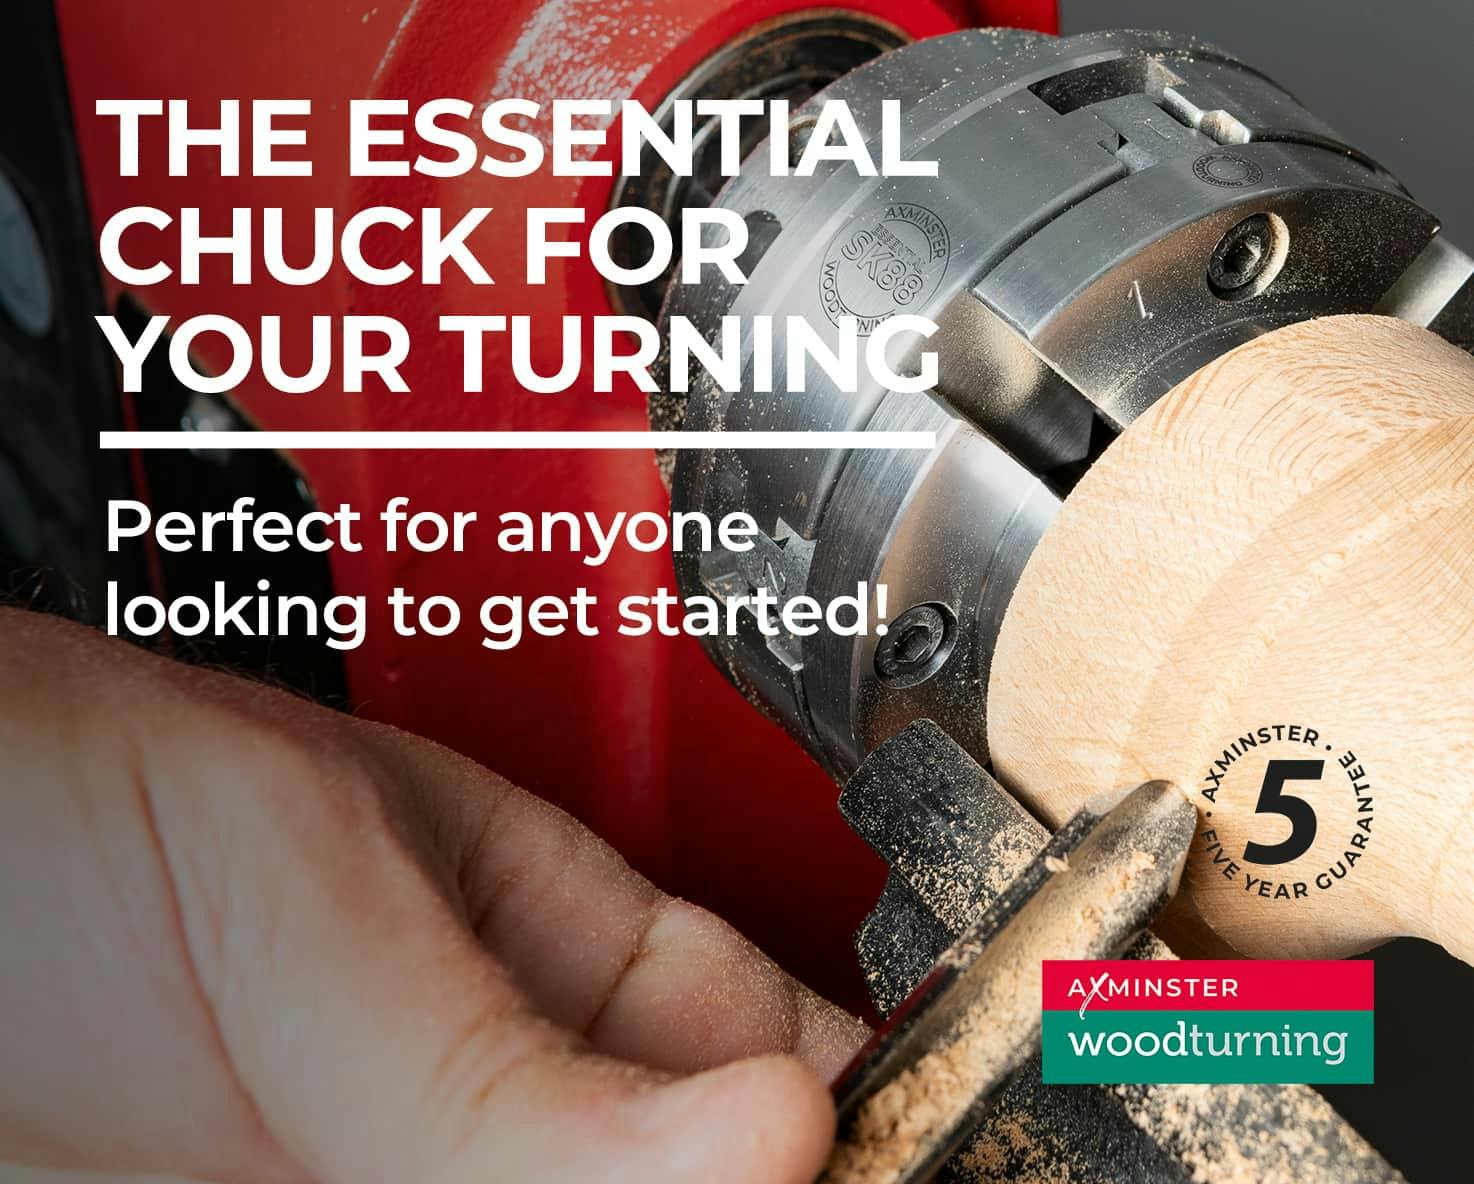 The ESSENTIAL chuck for your turning